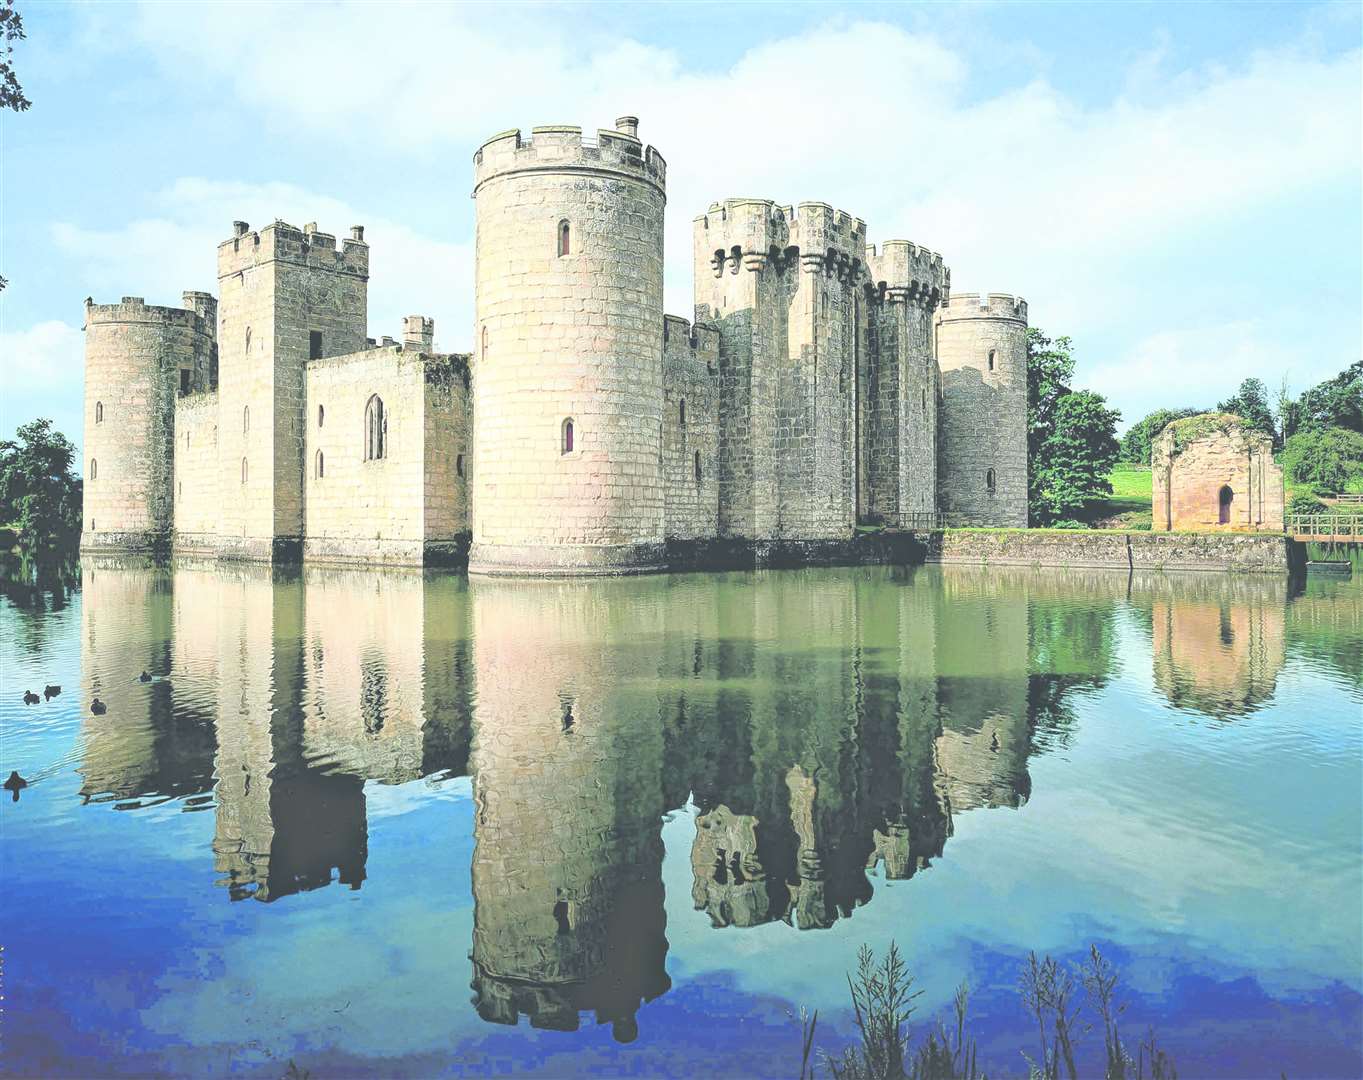 Bodiam Castle in East Sussex has also reopened its gardens